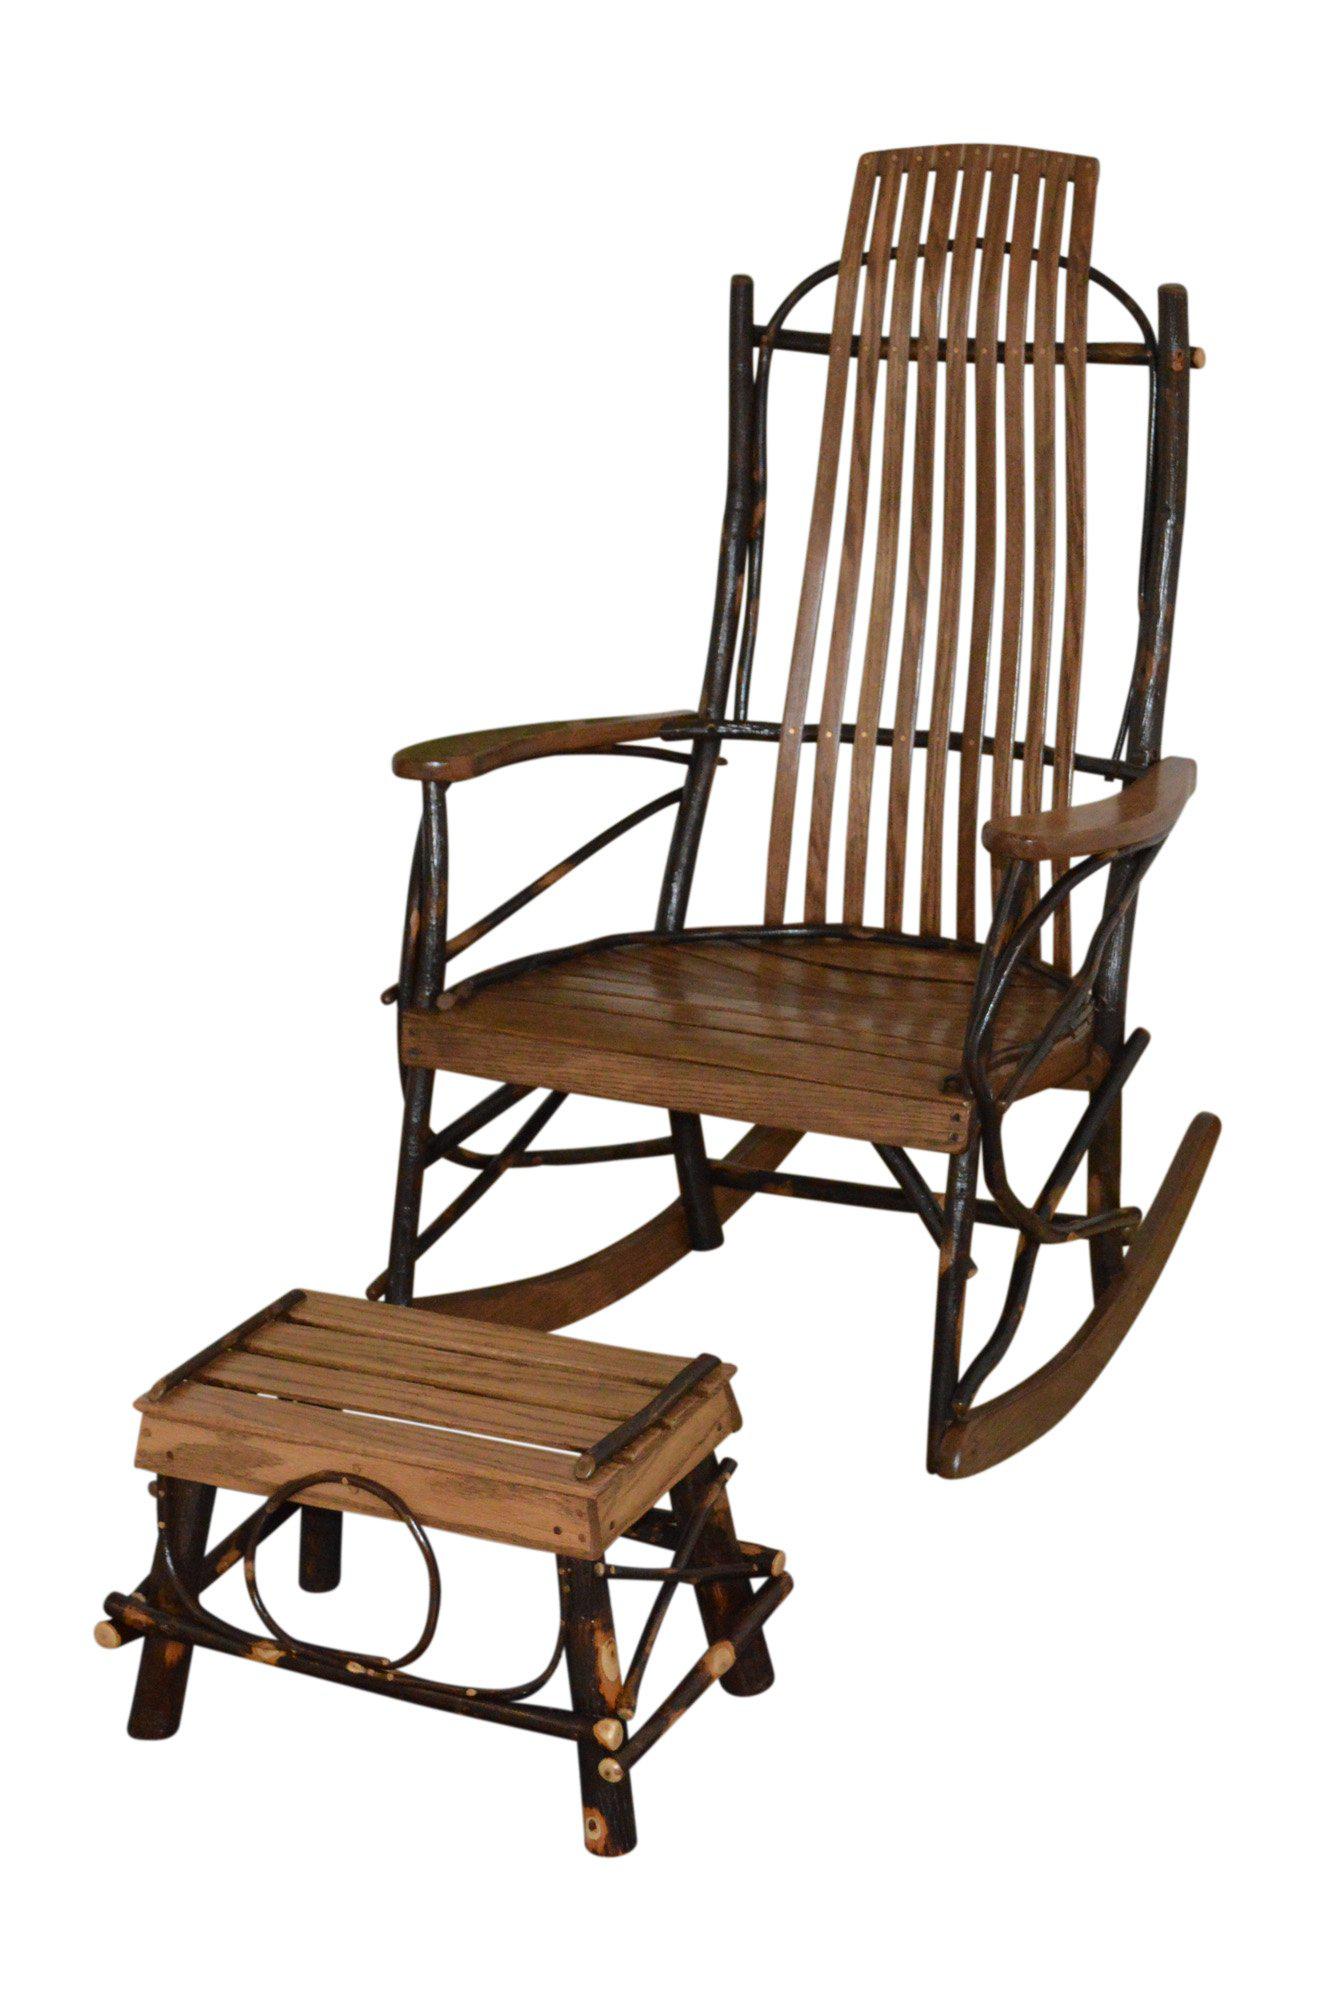 A&L Furniture Co. Amish Bentwood Hickory 9-Slat Rocking Chair with Foot Stool Set - LEAD TIME TO SHIP 4 WEEKS OR LESS